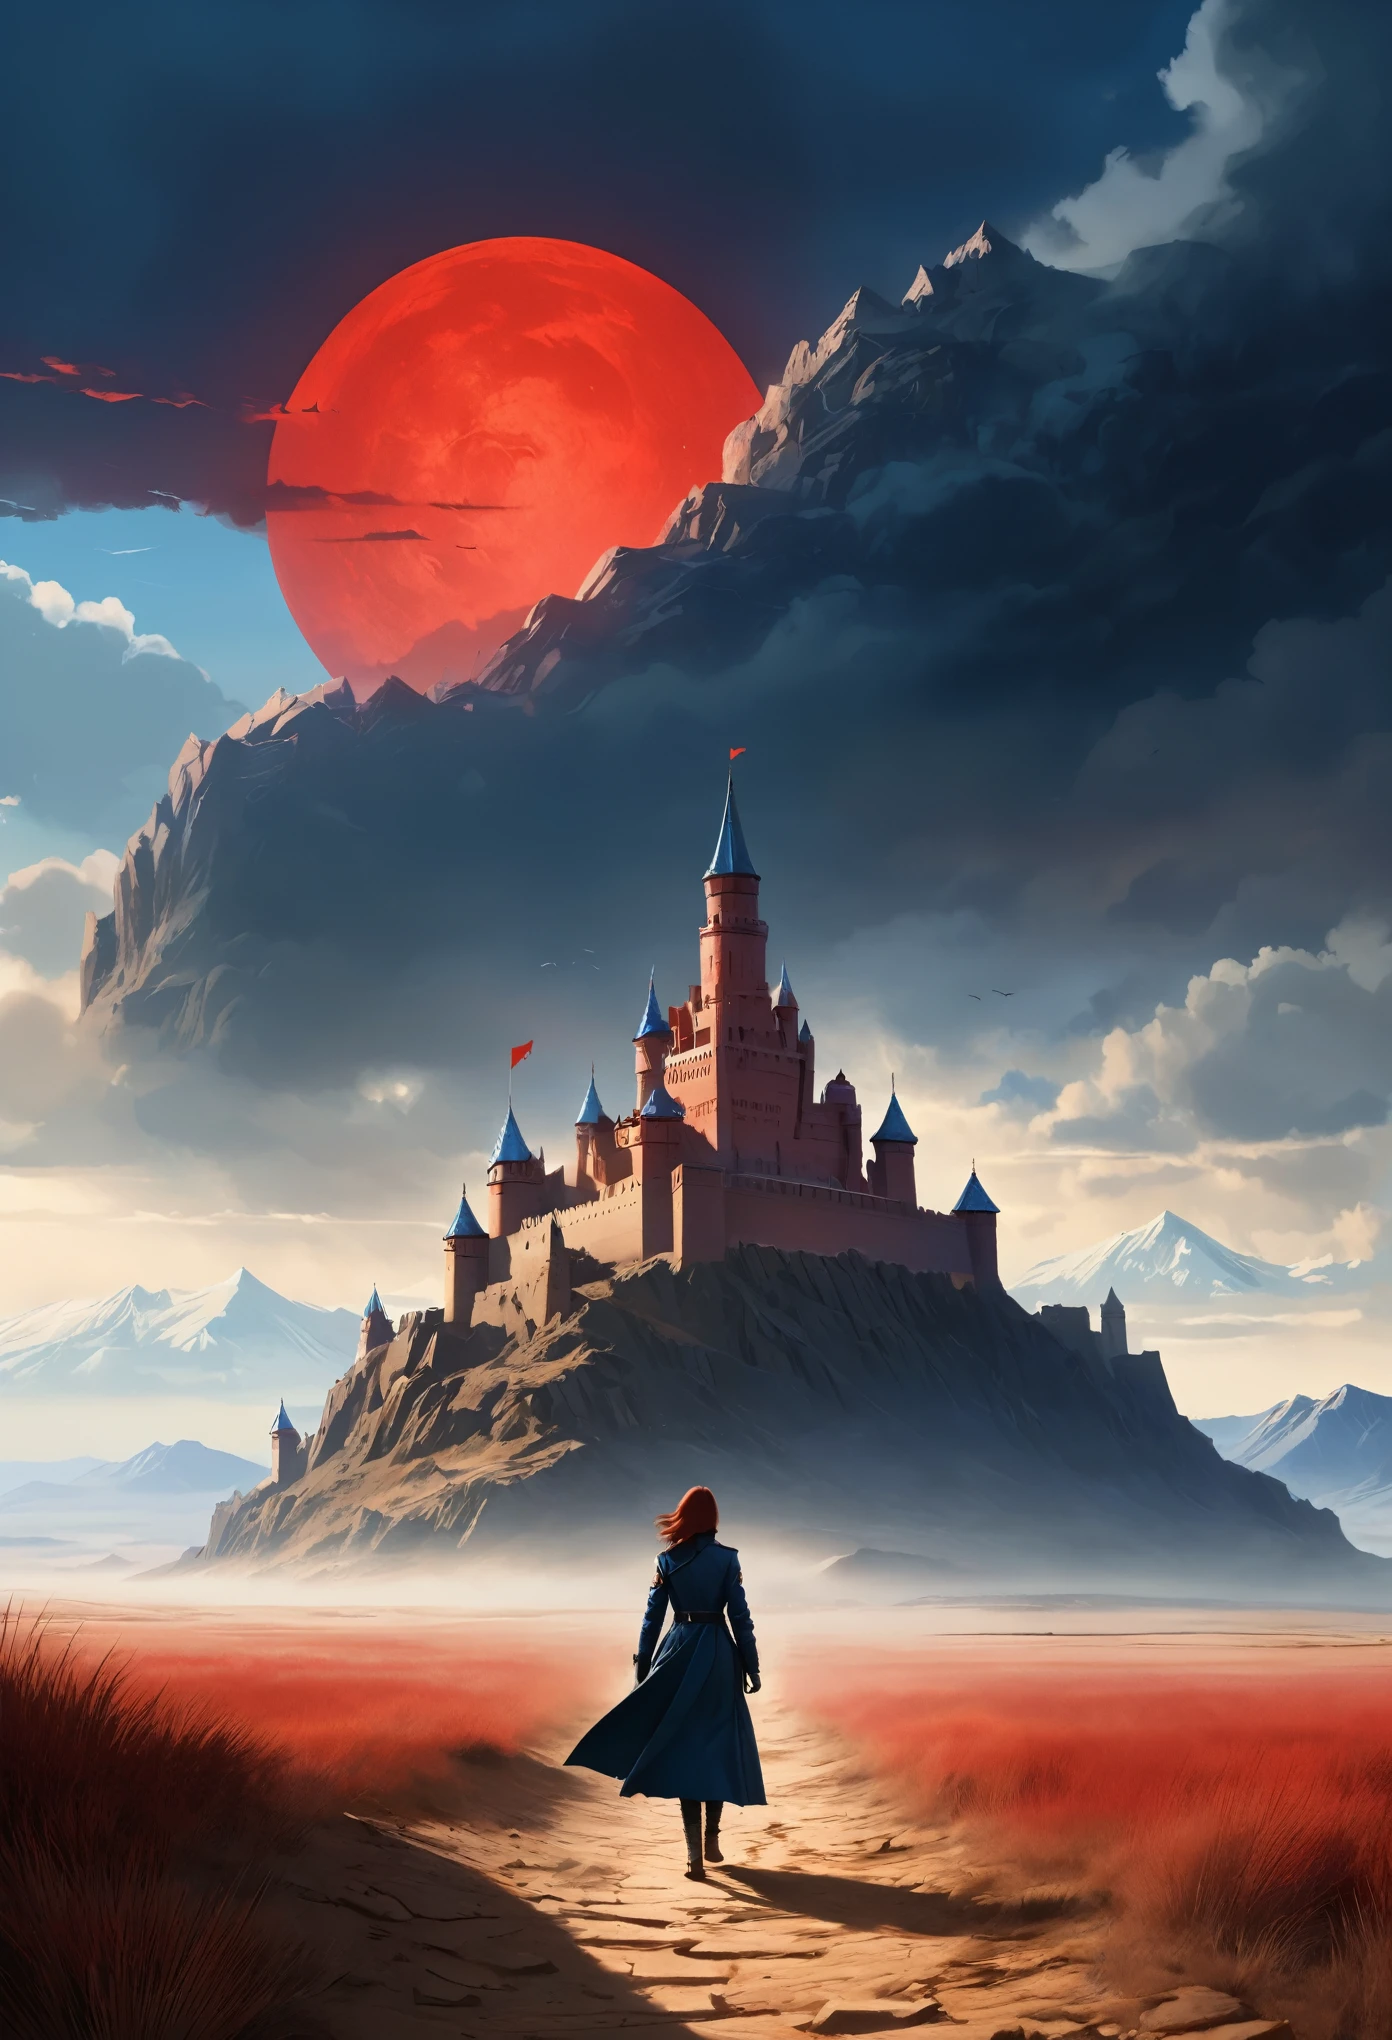 masterpiece, illustration, ((massive giant military babel fortress made of carving stone standing on desert land far away)), (babel tower), pale blue sky, sunlight, fog, shadow, dark grass with stone, uninhabitable, barren land, nature, (mountains), unsaturated, (young girl wearing dark blue coat walking towards the castle standing far away), medium length red hair, moscow, soviet union, (dark dragon with glowing red eyes flying on the sky above the fortress)